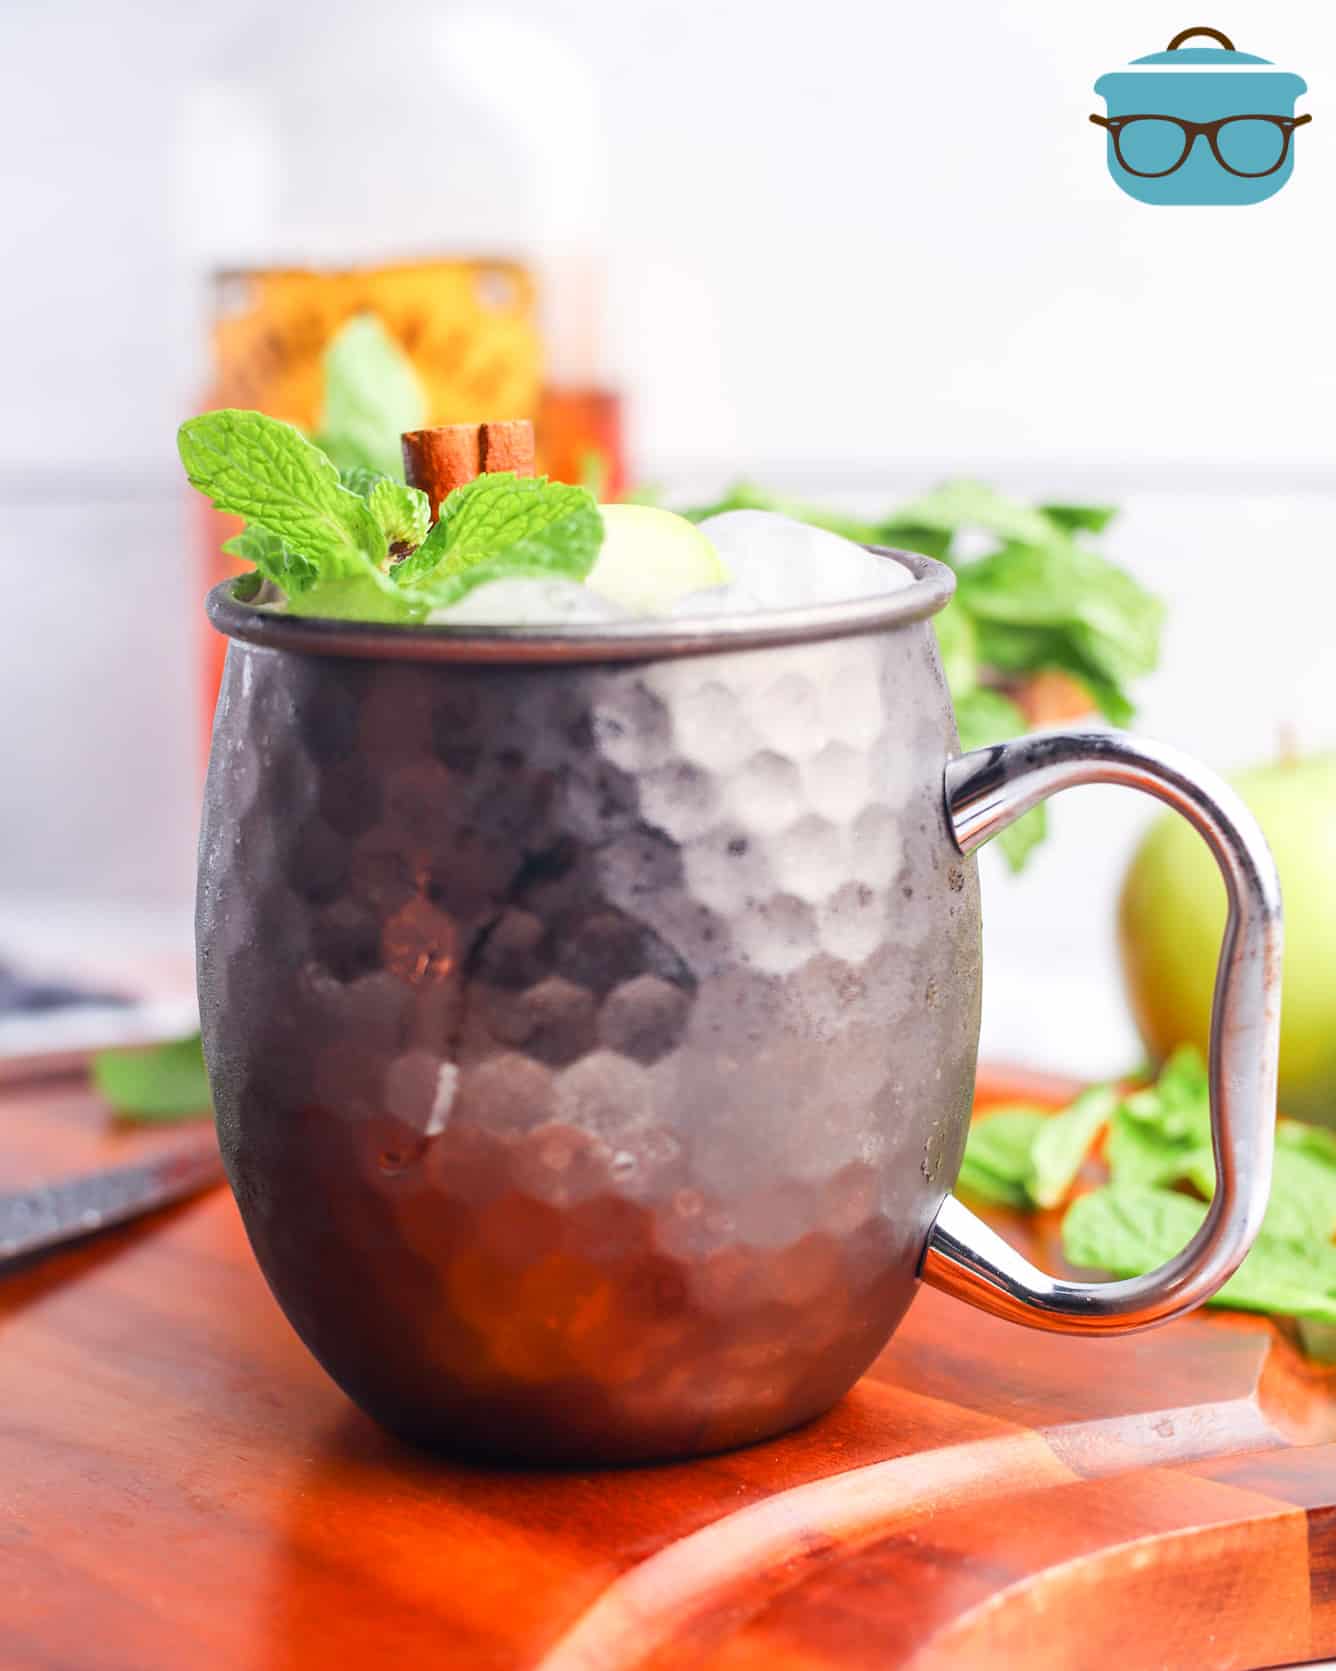 Apple Cider Moscow Mule, shown with a sprig of mint and a bottle of Fireball Cinnamon Whisky in the background.